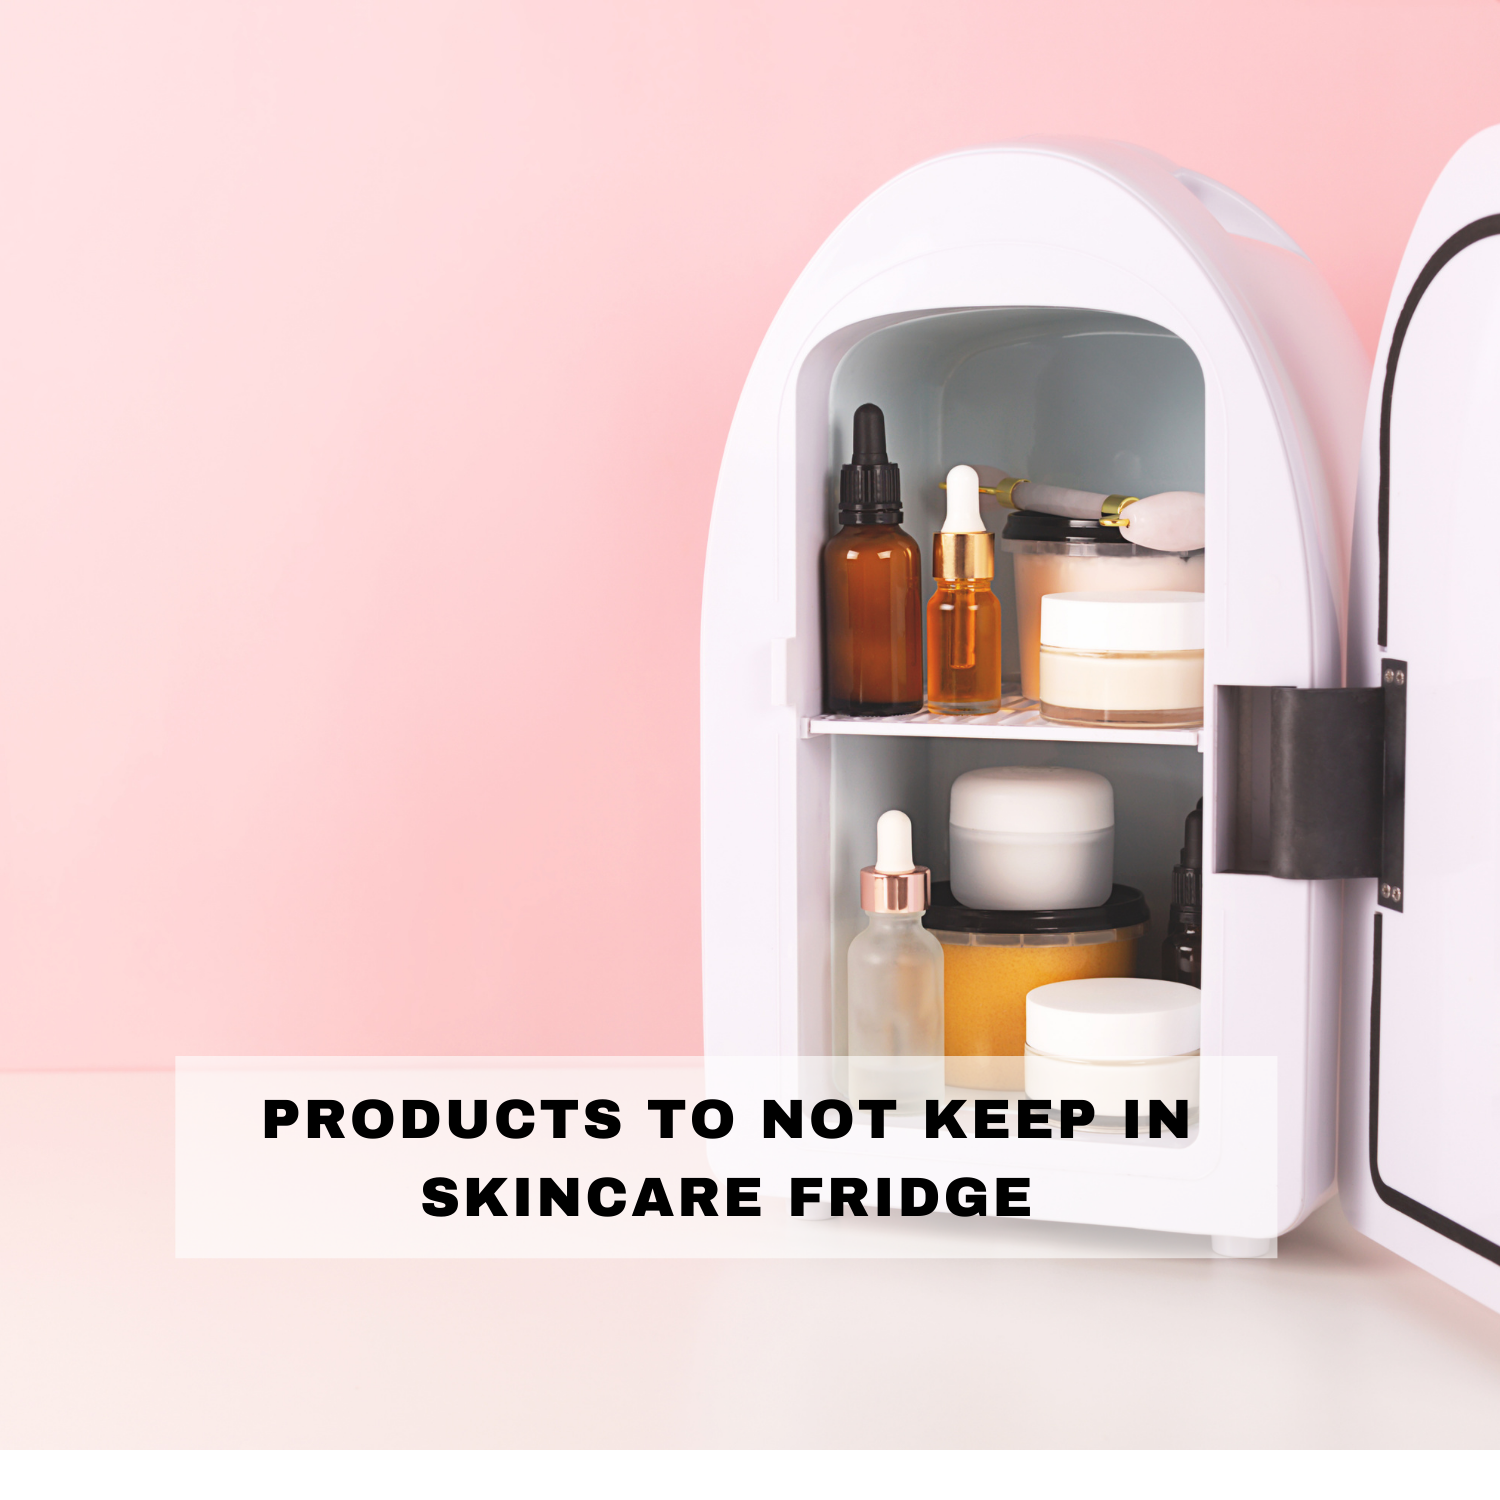 Products to Not Keep in Skincare Fridge